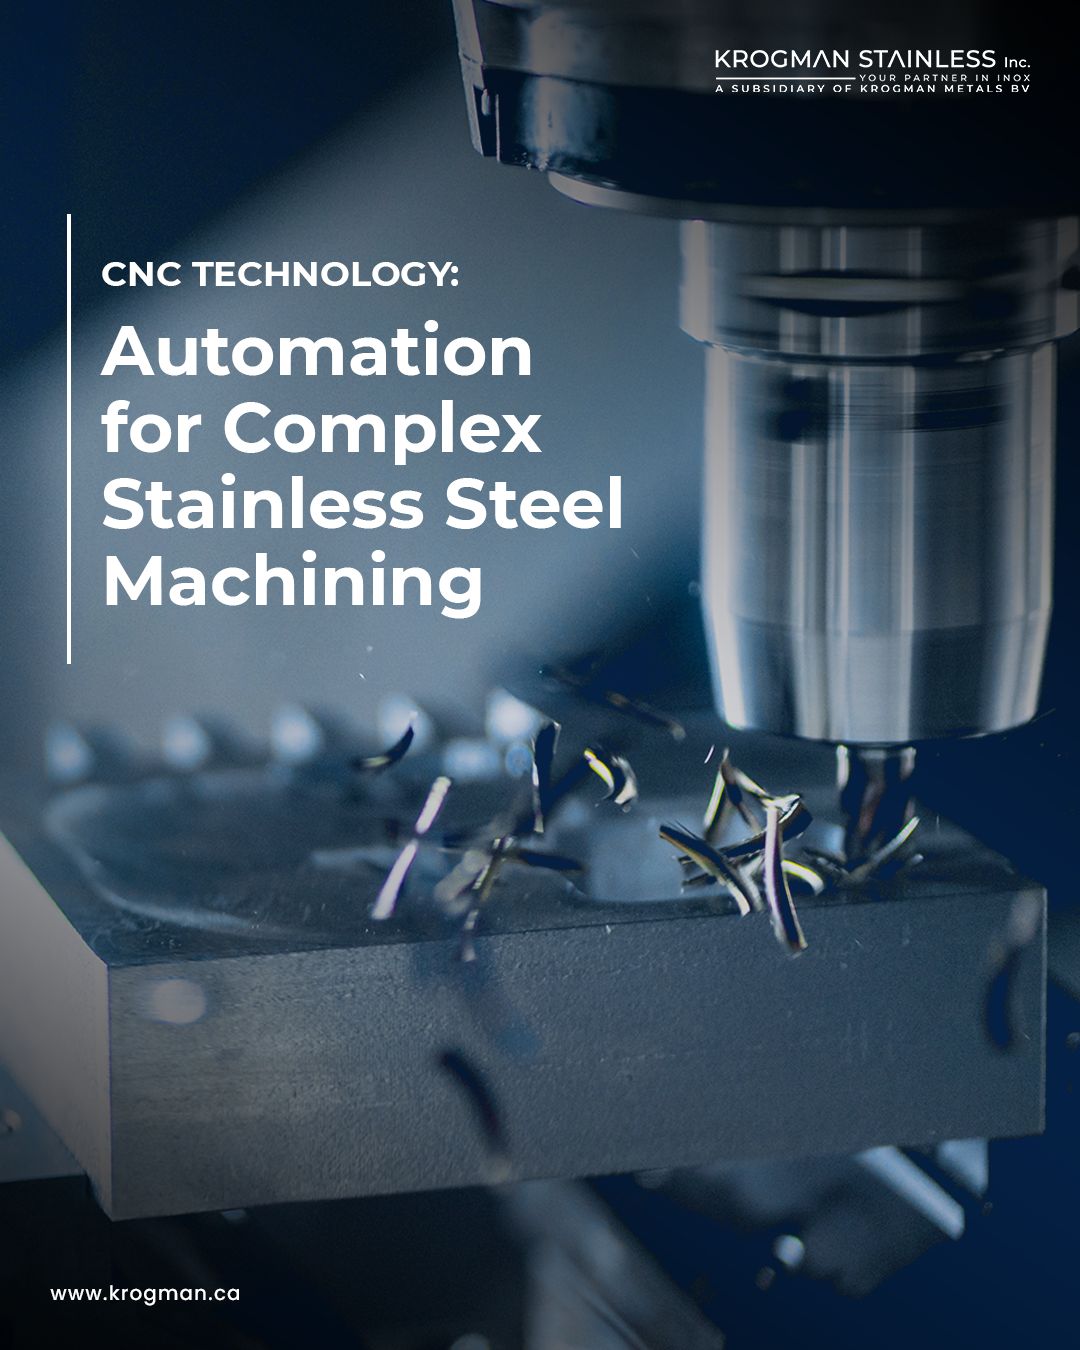 CNC Technology: Automation for Complex Stainless Steel Machining